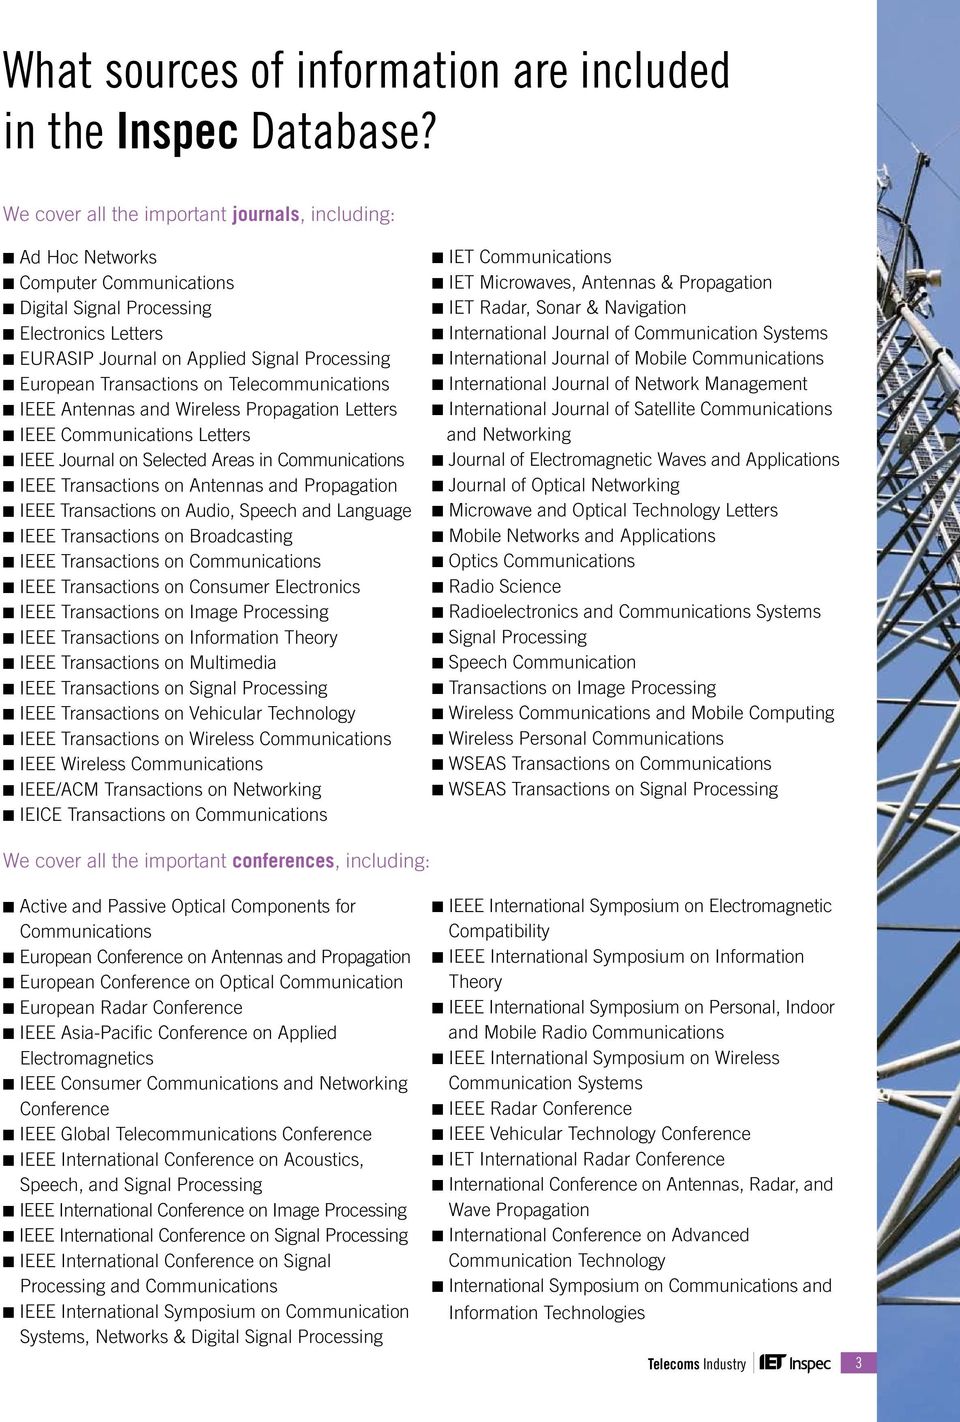 Transactions on Telecommunications n IEEE Antennas and Wireless Propagation Letters n IEEE Communications Letters n IEEE Journal on Selected Areas in Communications n IEEE Transactions on Antennas